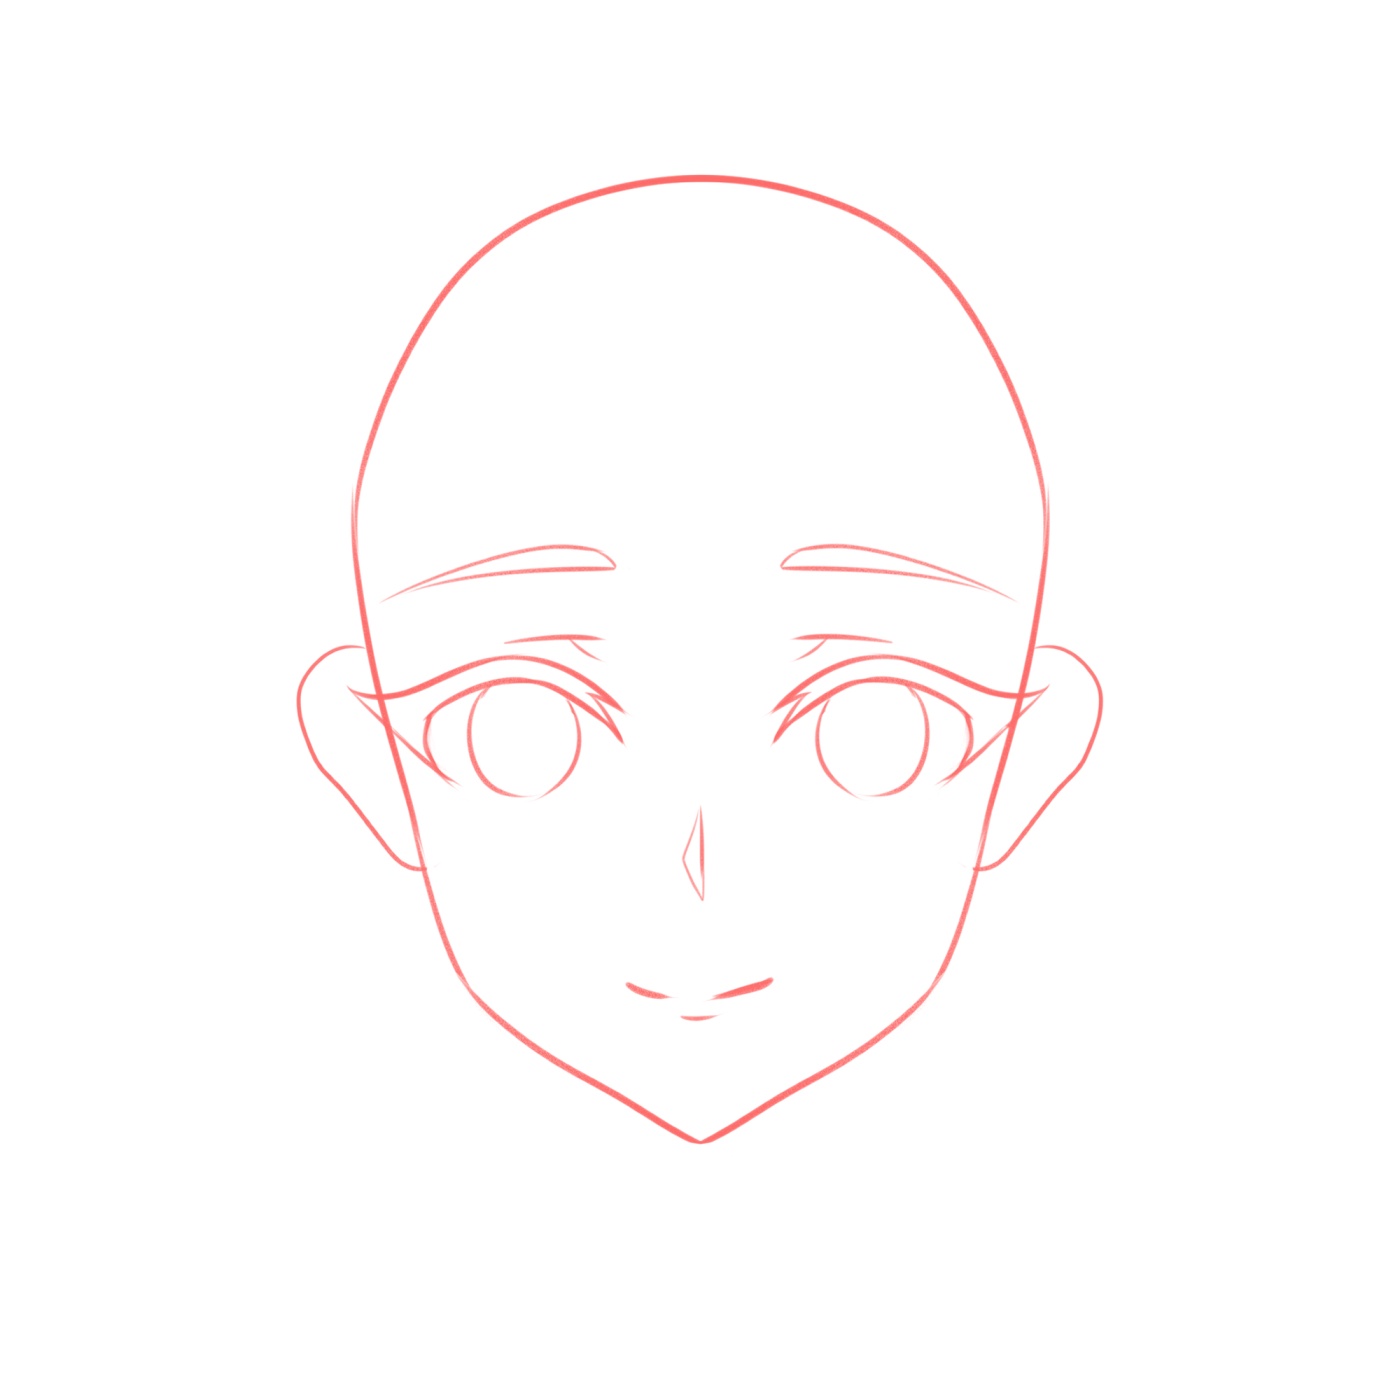 How To Draw The Head And Face Anime Style Guideline Front View Tutorial Mary Li Art